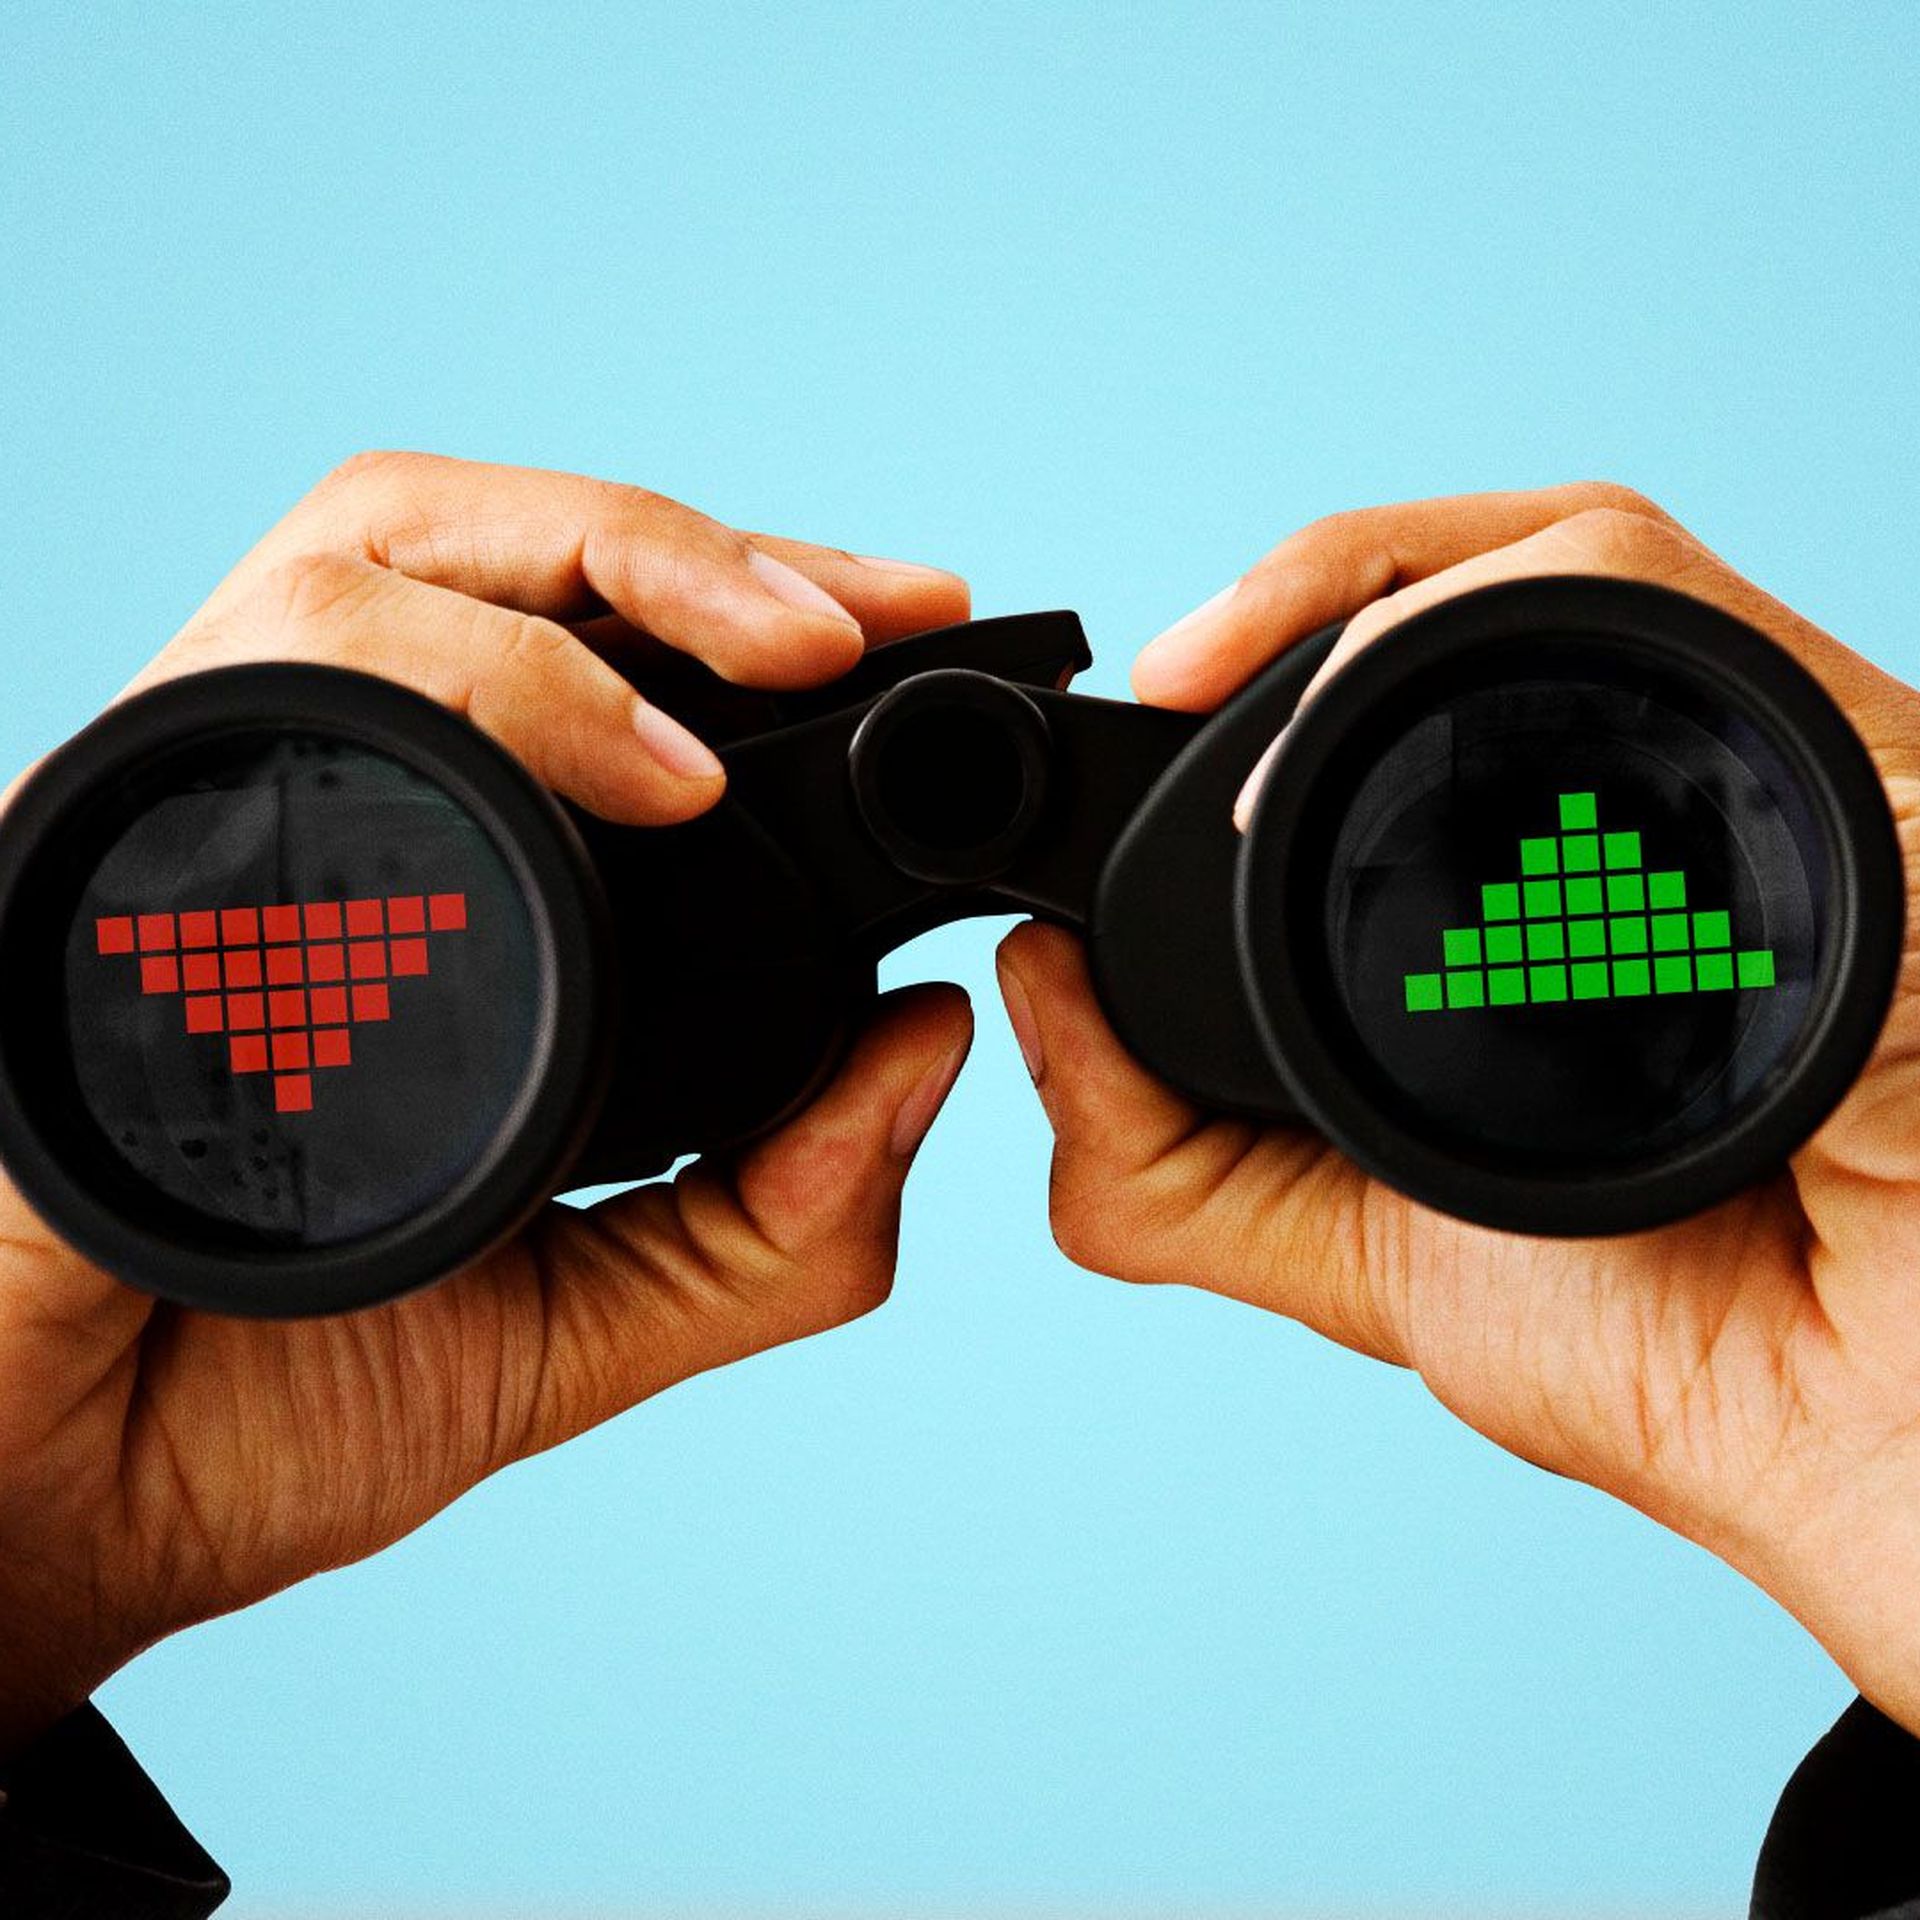 Illustration of suited hand holding binoculars with negative and positive stock arrows